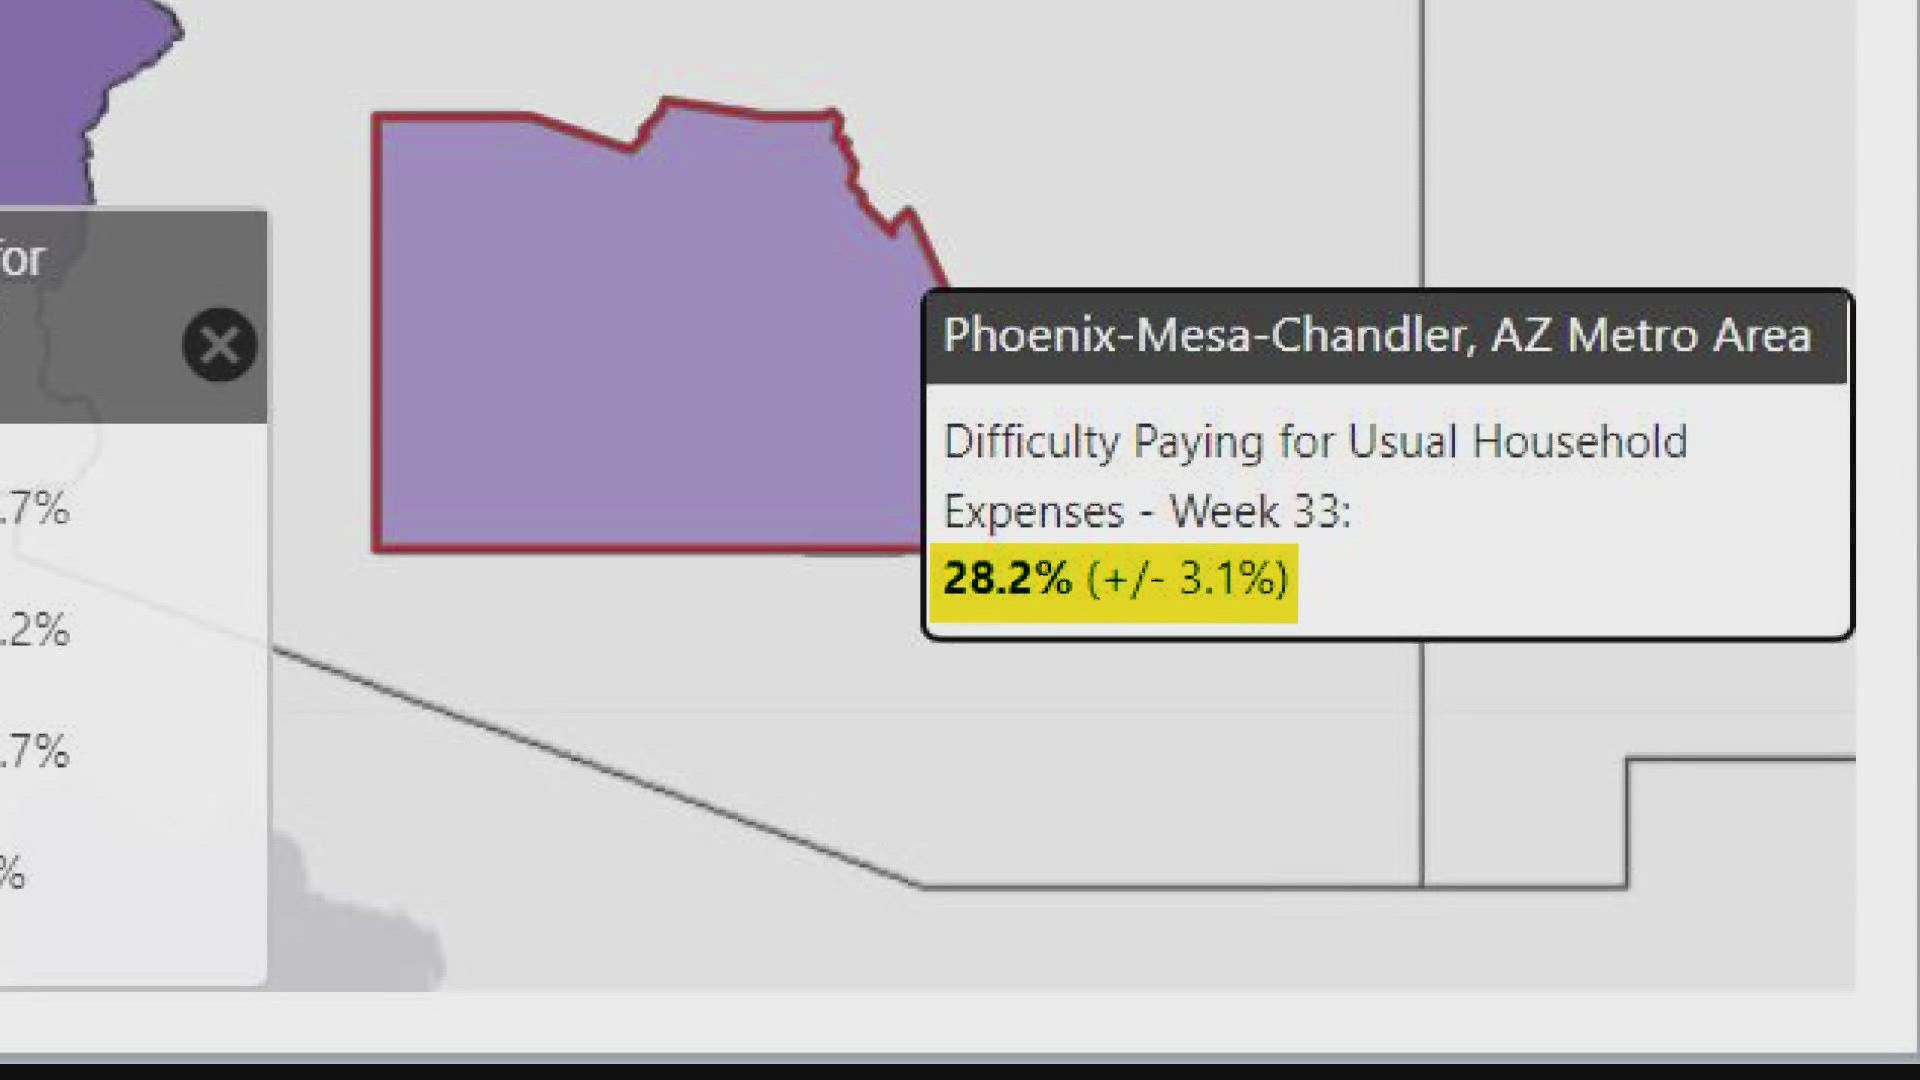 According to a US Census Bureau survey, 40 percent of the people they asked in Phoenix now struggling to pay their household expenses.